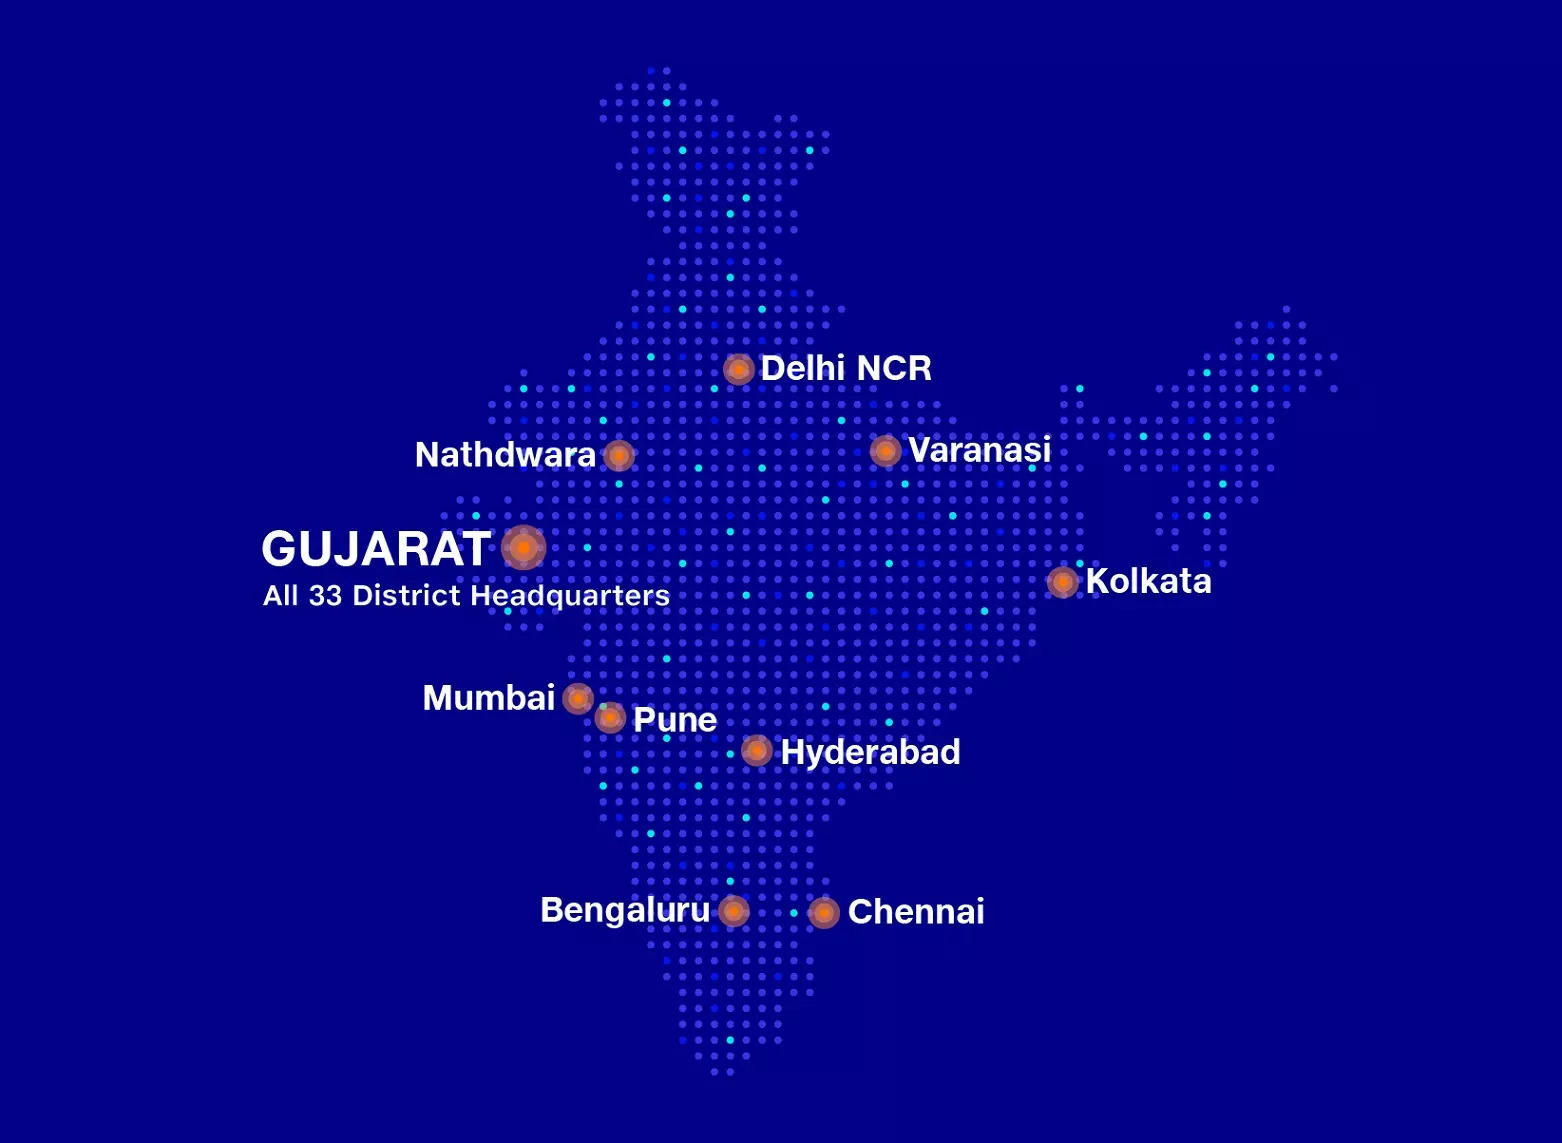 Jio says his 5G network is now available throughout Gujarat